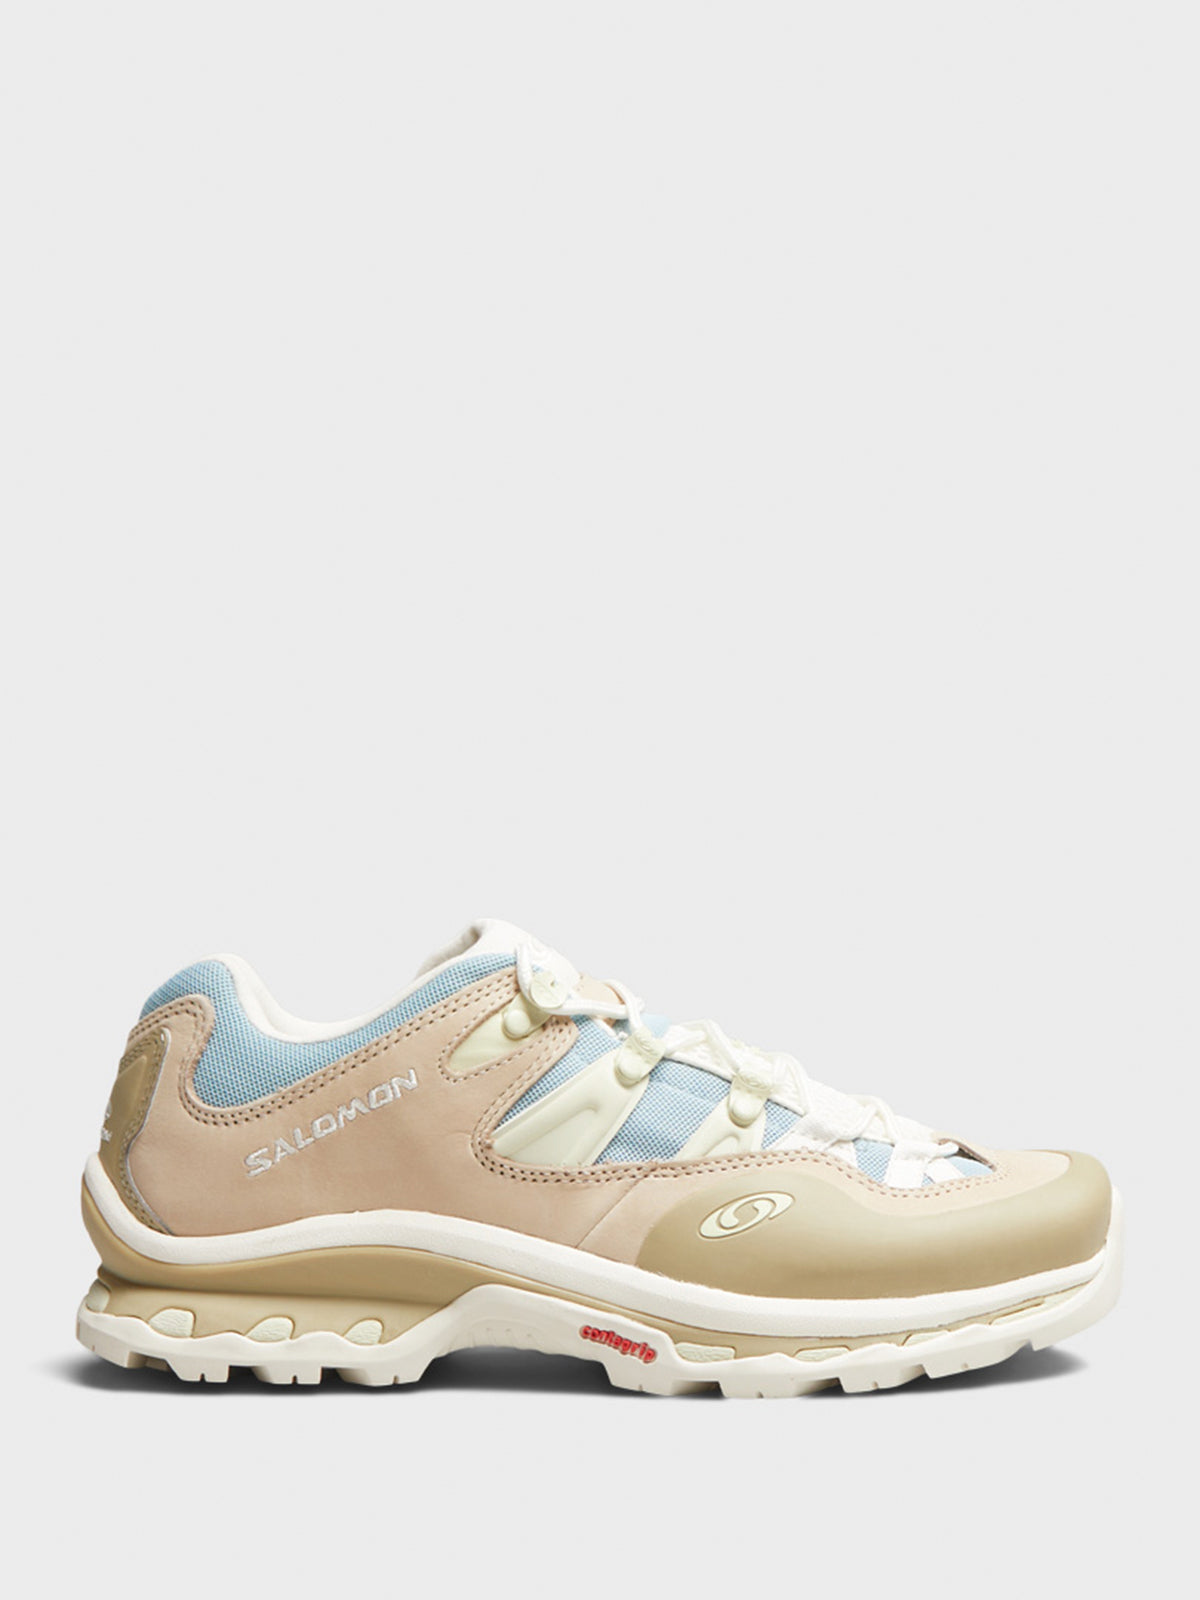 Salomon - XT-Quest 2 Sneakers in Winter Pear, Sterling Blue and Salte Green